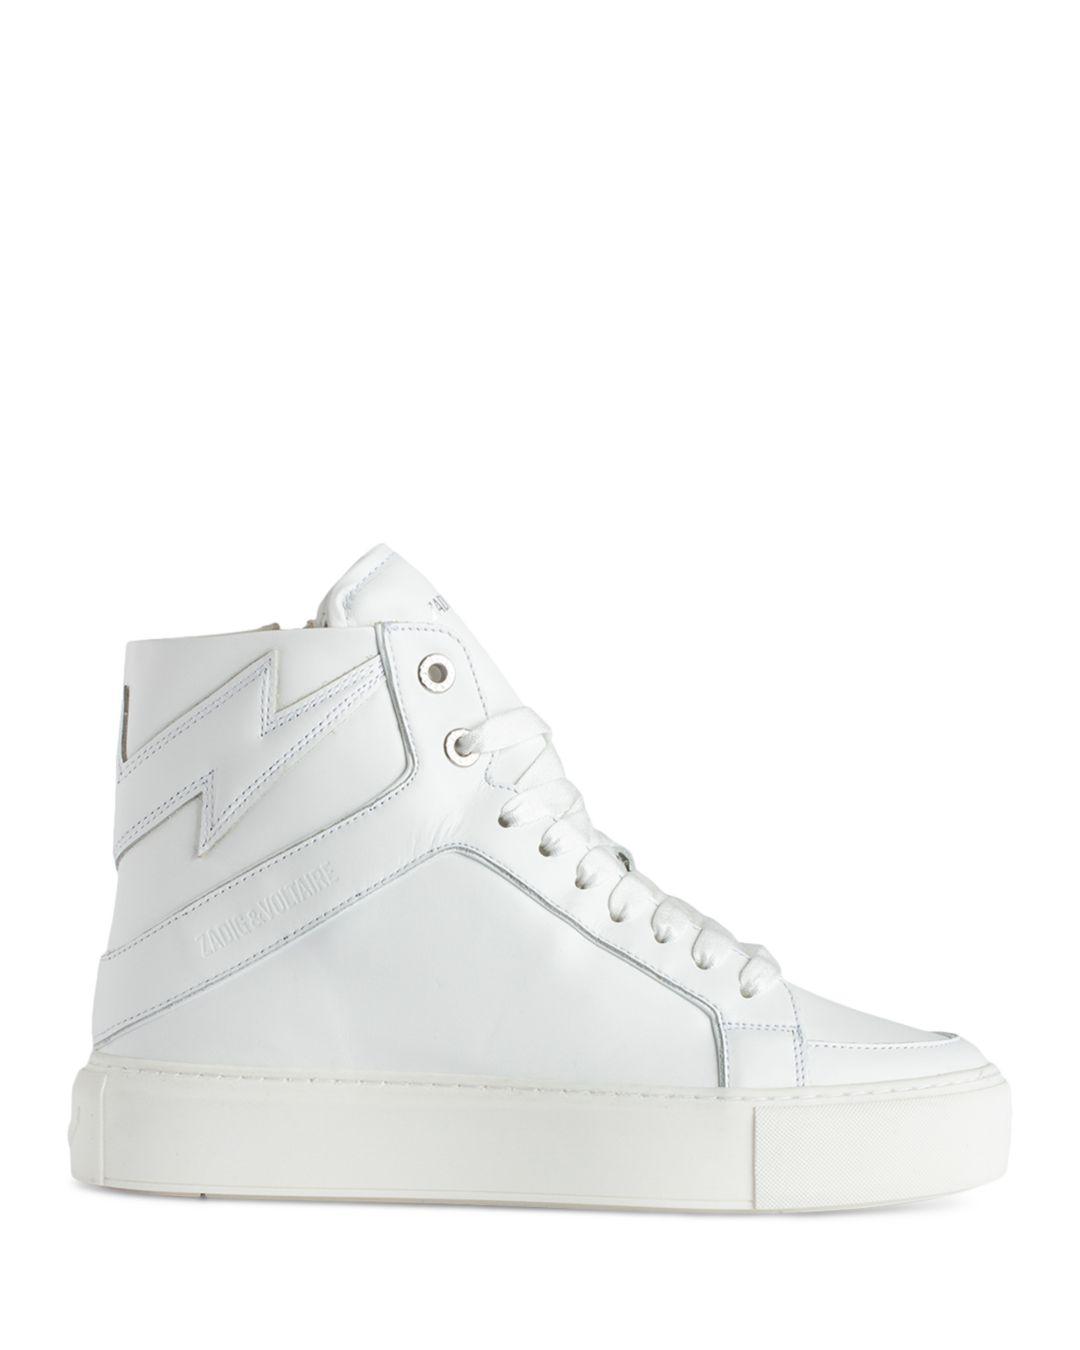 Zadig & Voltaire High Flash High Top Platform Sneakers in White | Lyst